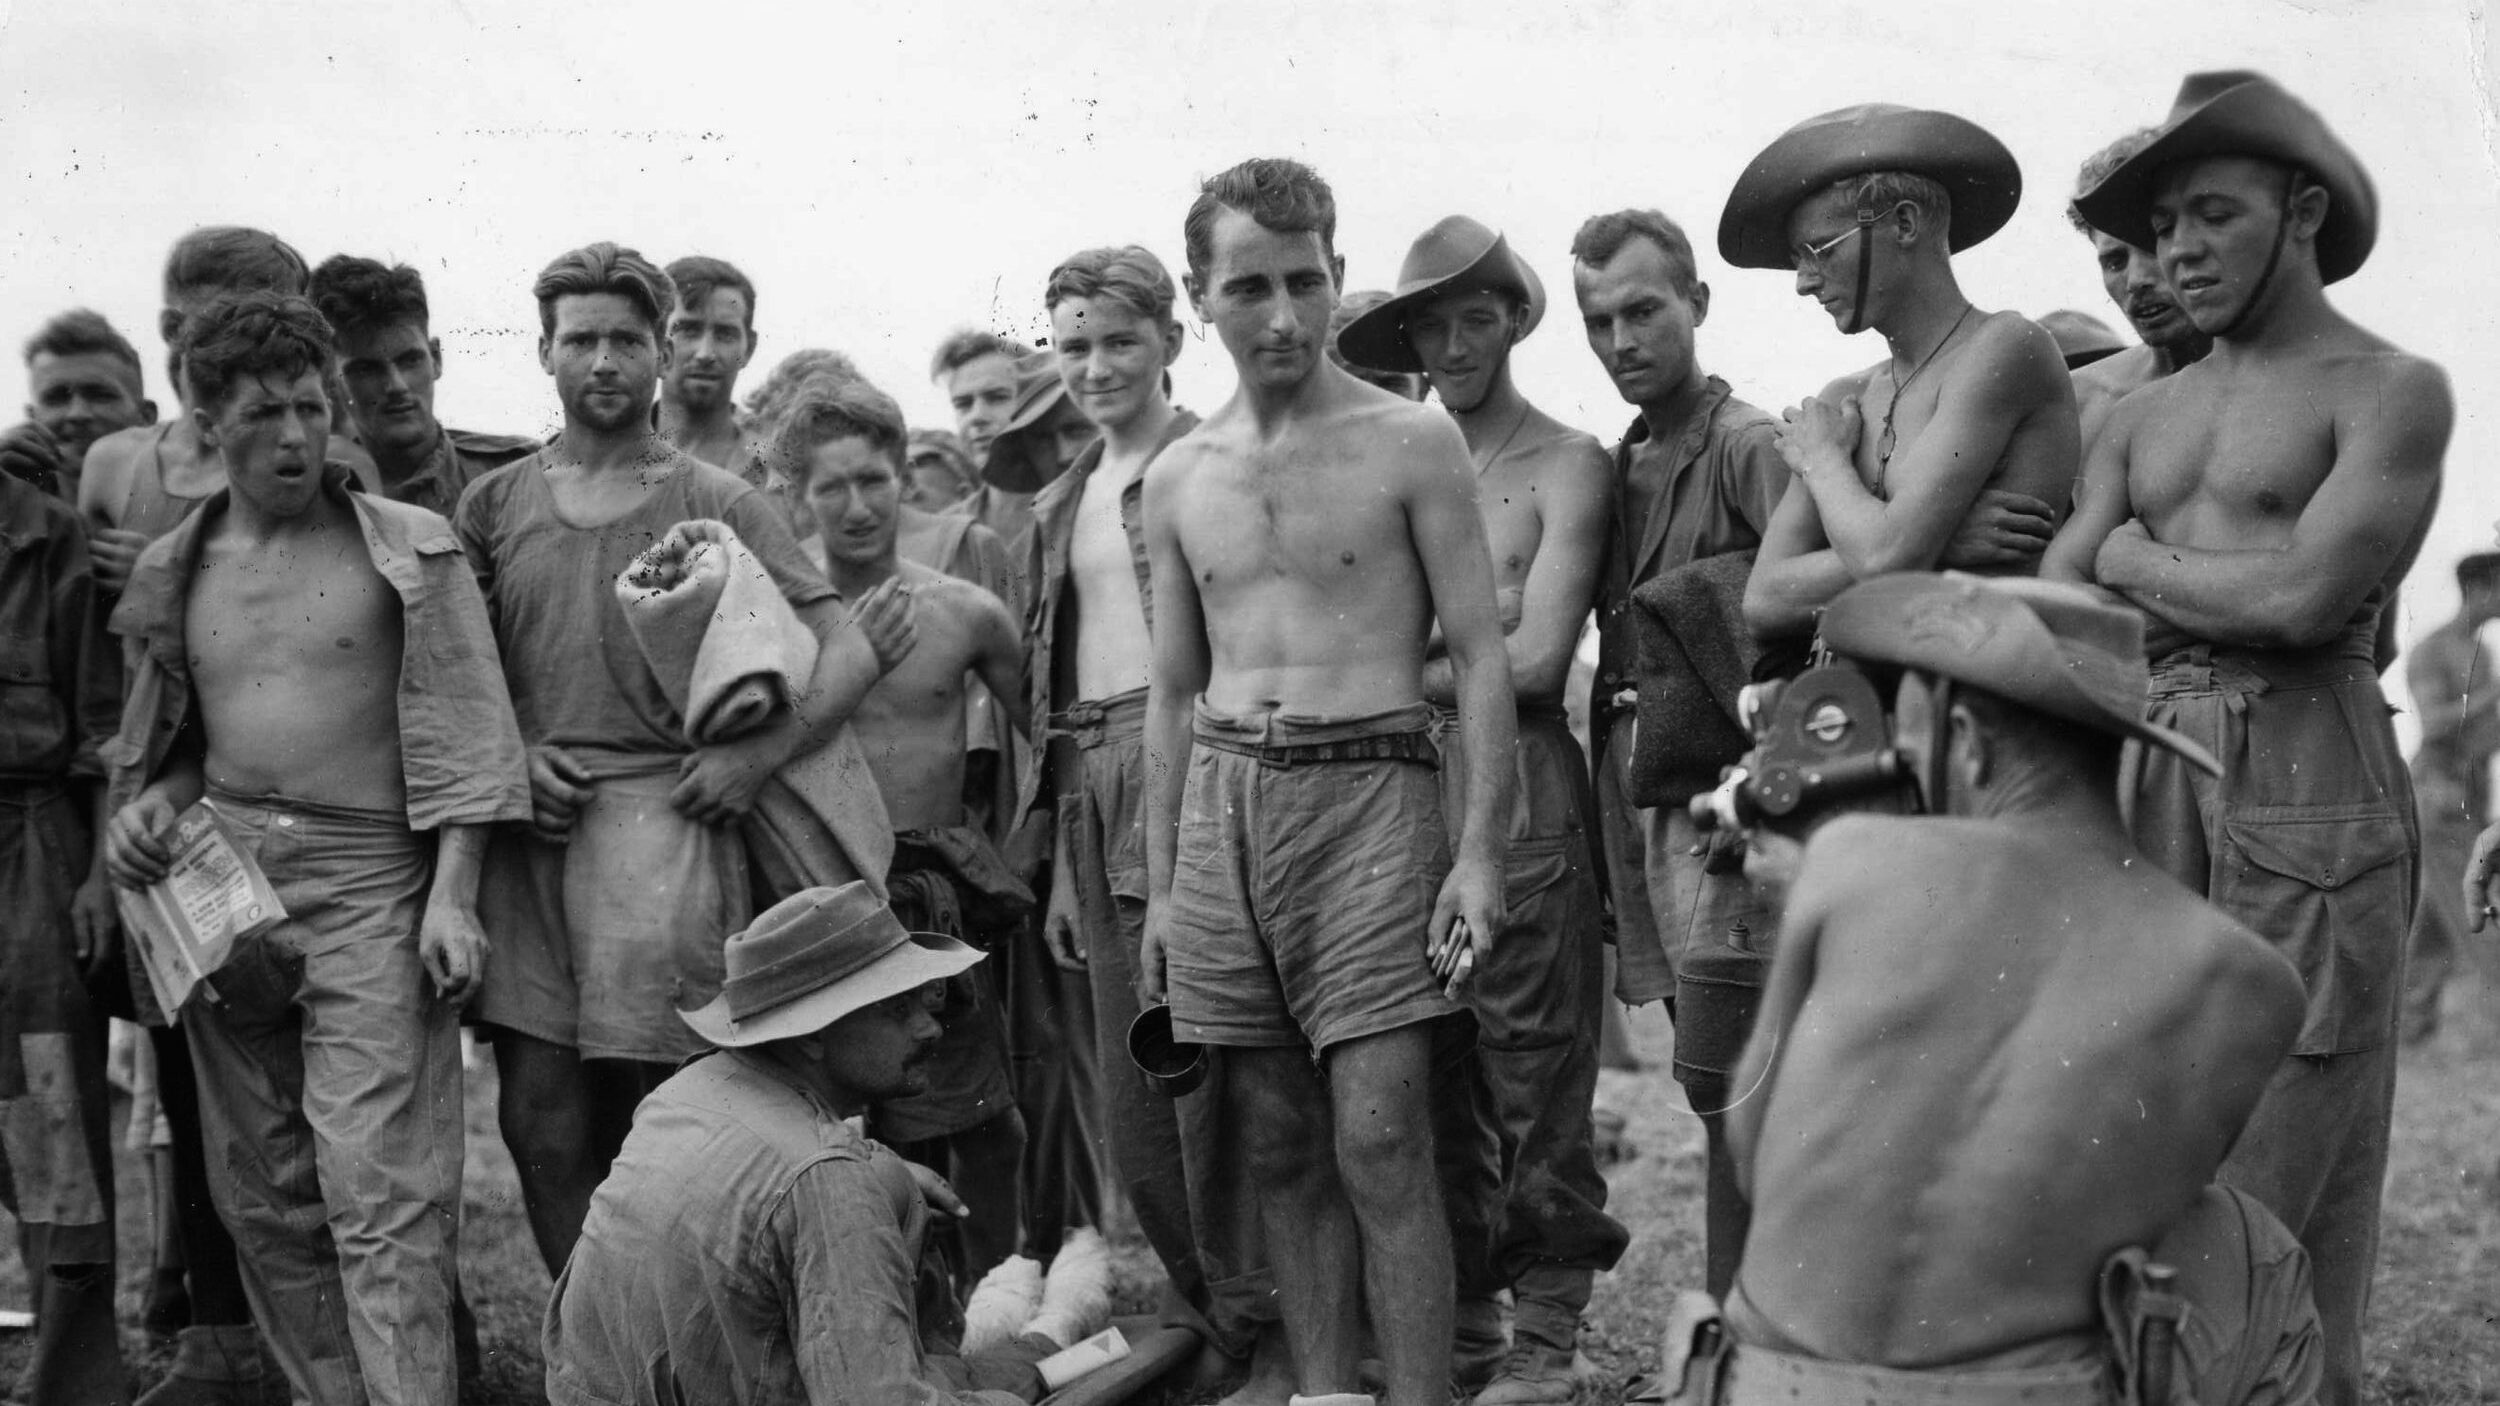 Recently liberated Allied prisoners of the Japanese show the effects of their time in captivity. Starvation and disease took their toll on the POWs, some of whom were in enemy hands for years. (Both: National Archives)